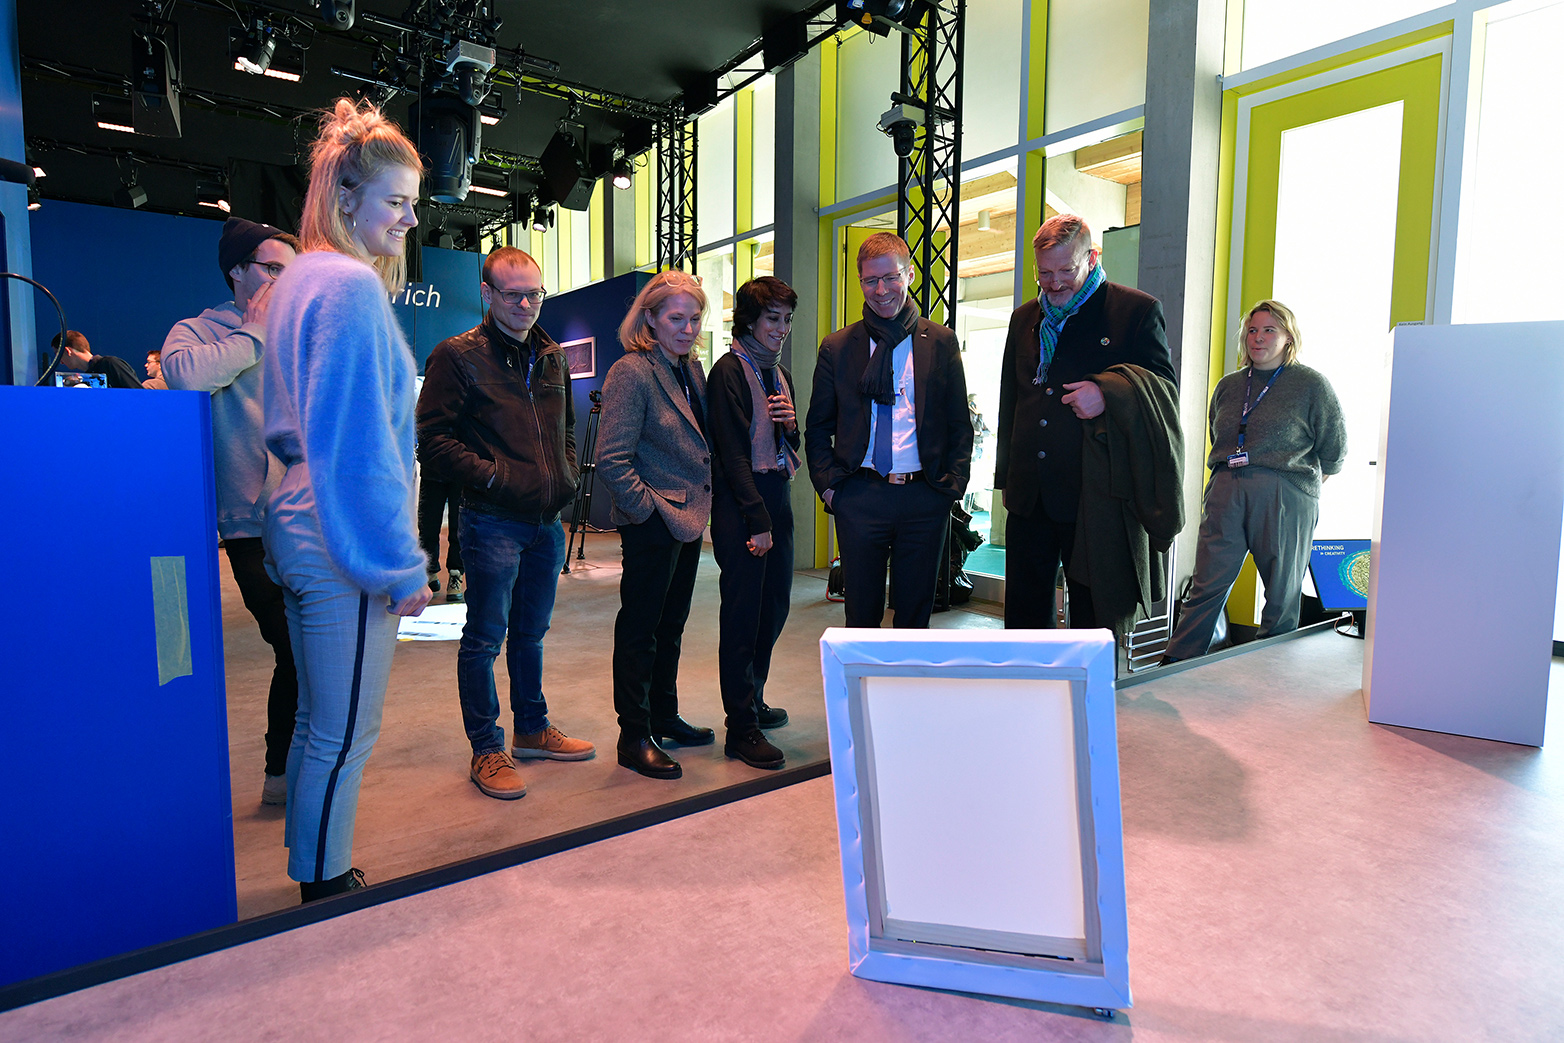 The “Walking Canvas” project brings blank canvases to life and sends them wandering among the audience’s legs – with individual walking styles and the human-like quality of being busy and having a goal. (all photos: ETH Zurich / Andreas Eggenberger)